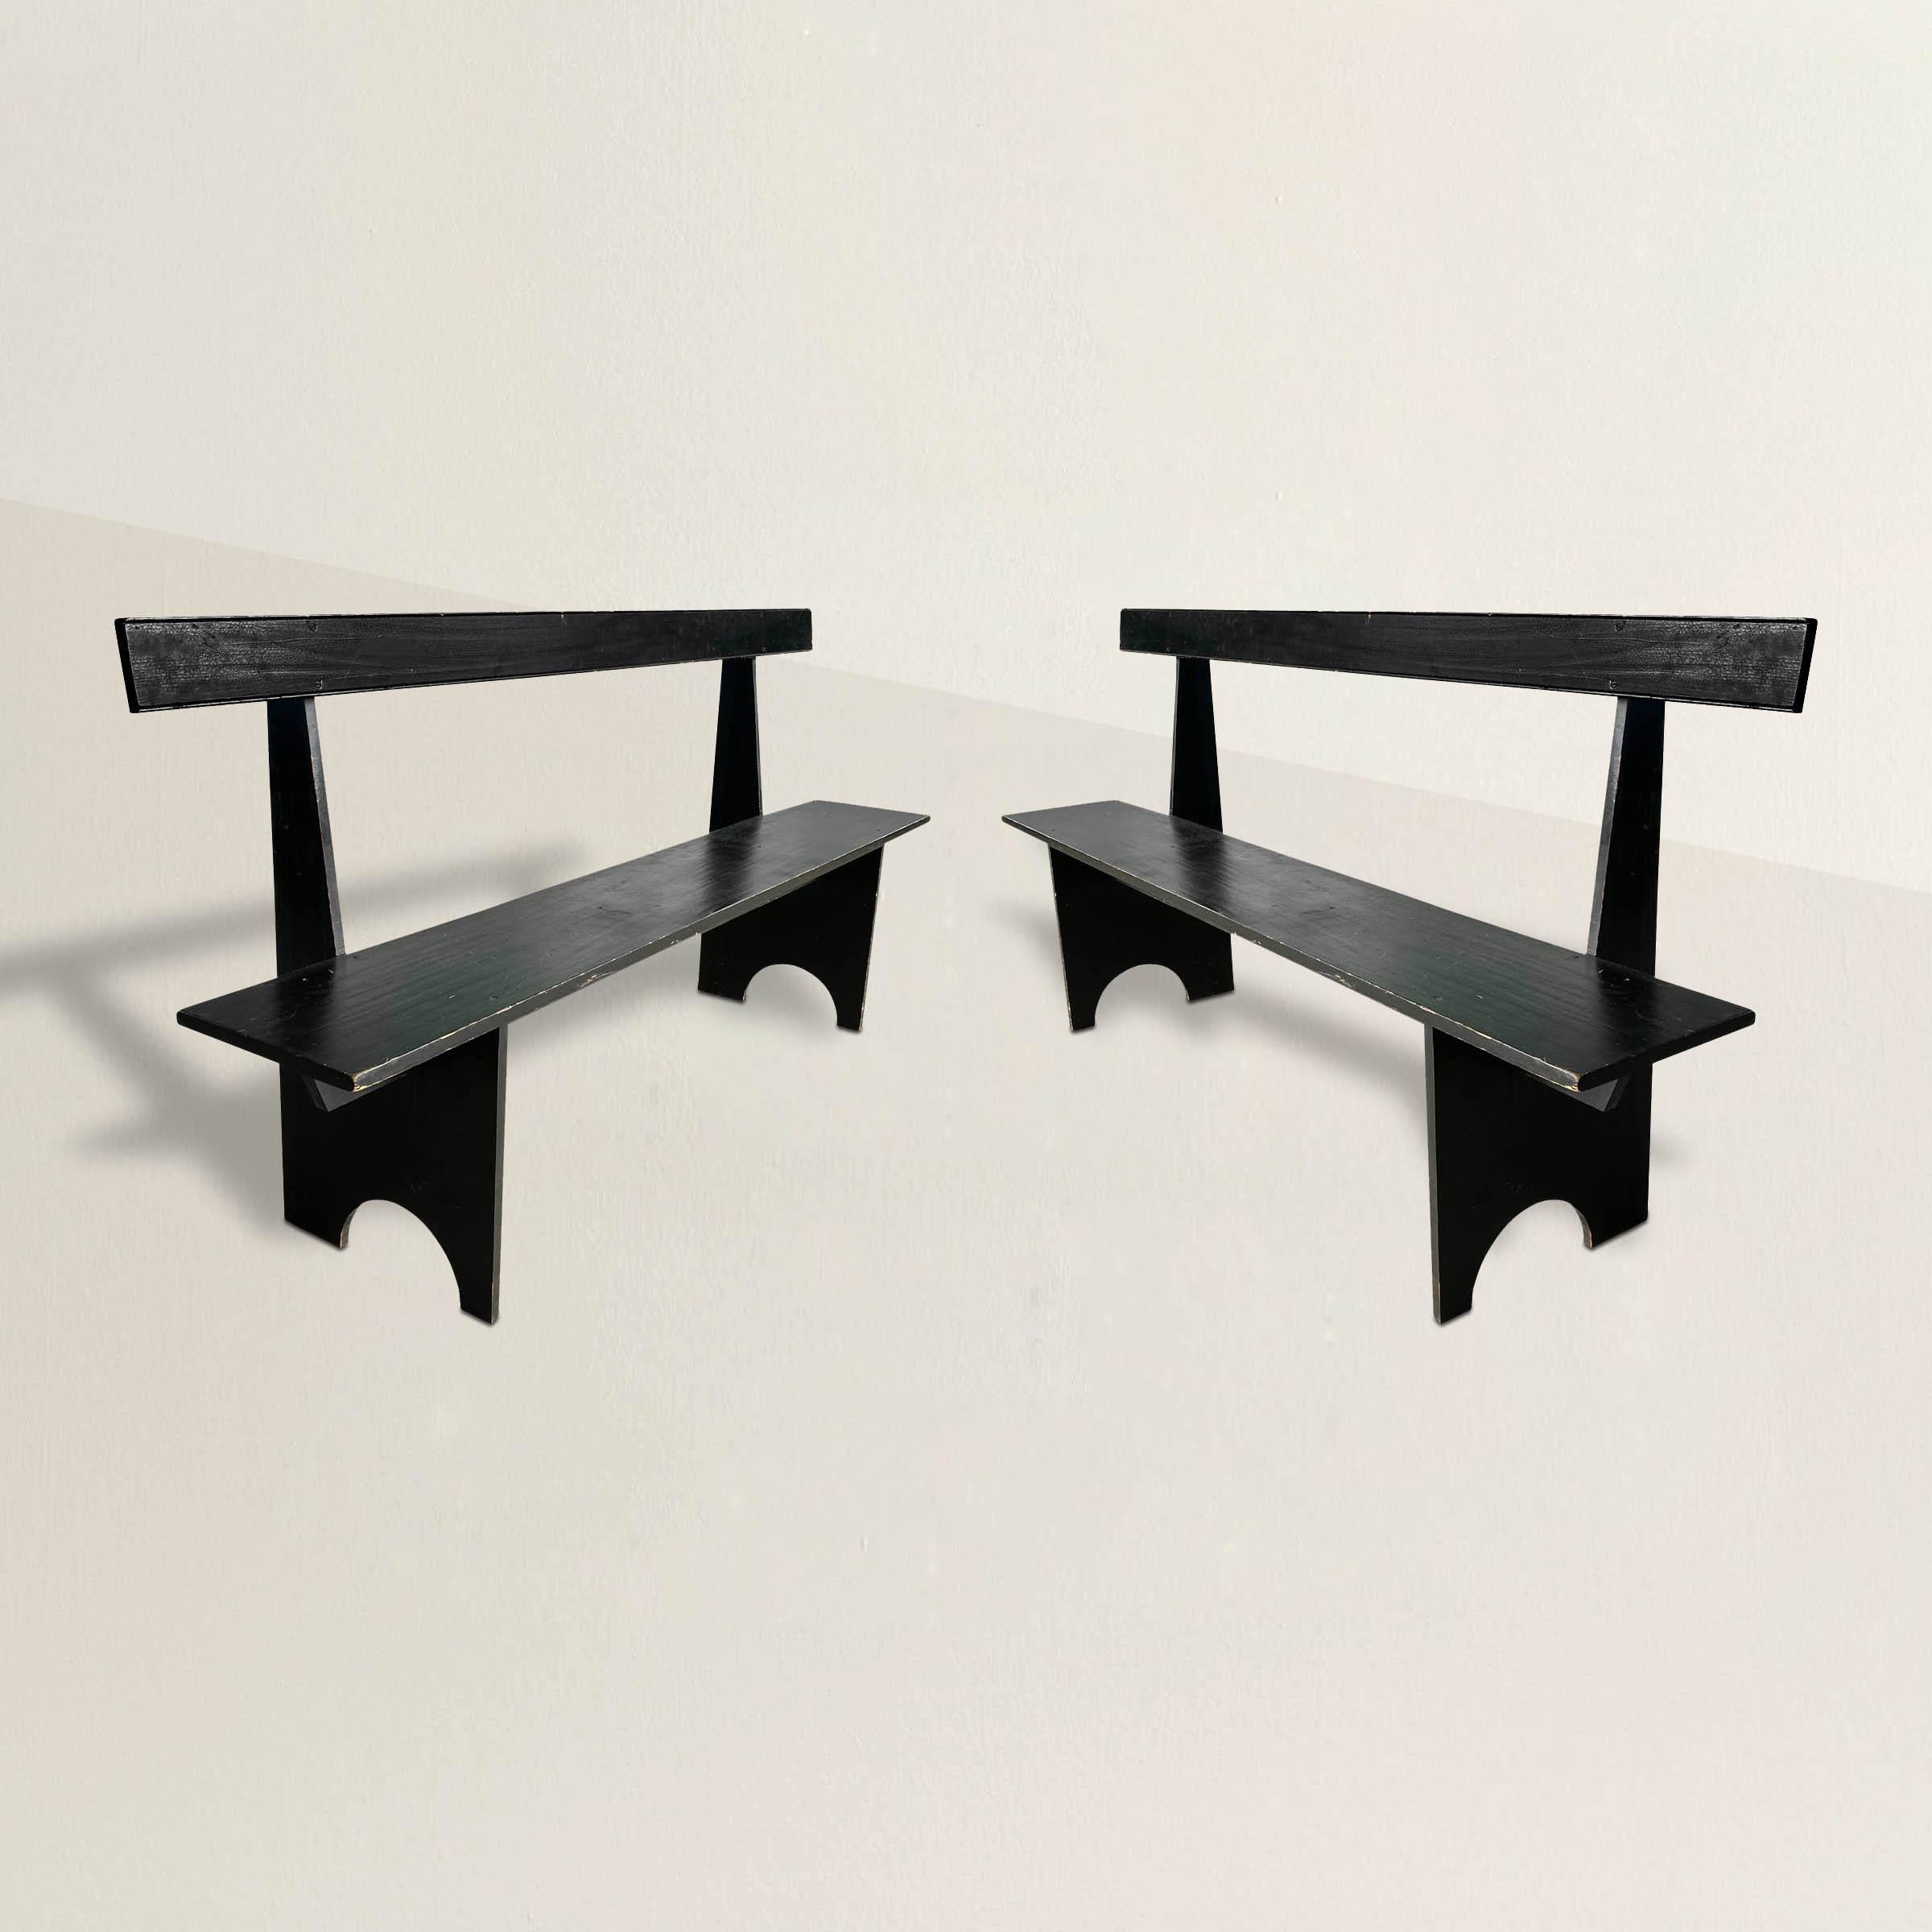 A chic pair of mid-20th century American modernist Shaker-inspired pine benches with striking silhouette that bend seamlessly into any style interior. Painted black with signs of wear from over 50 years of use. Perfect in your dining room, down a